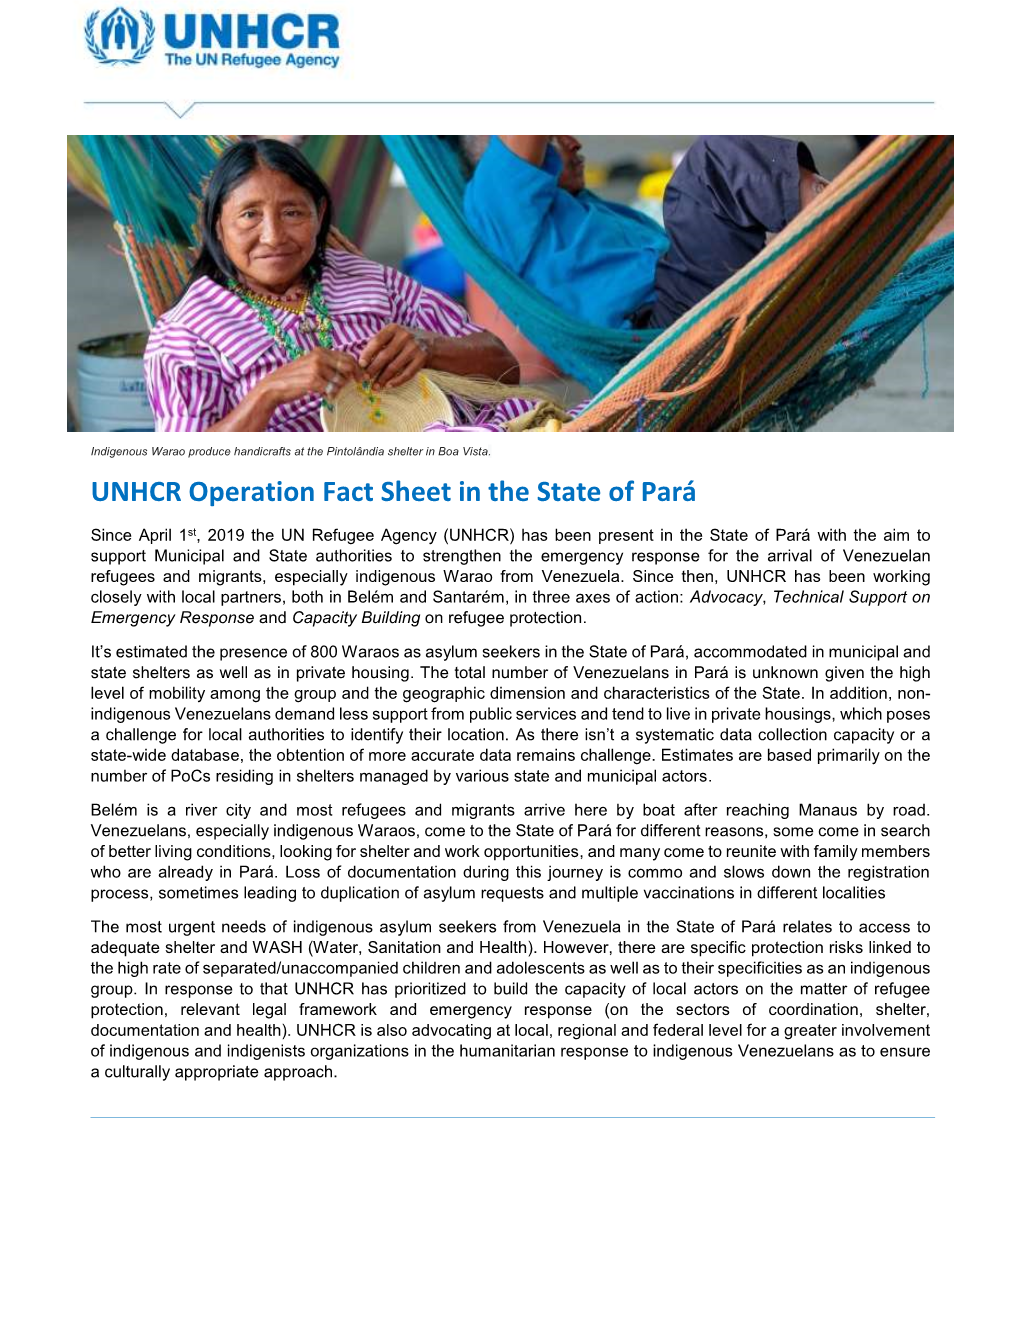 UNHCR Operation Fact Sheet in the State of Pará